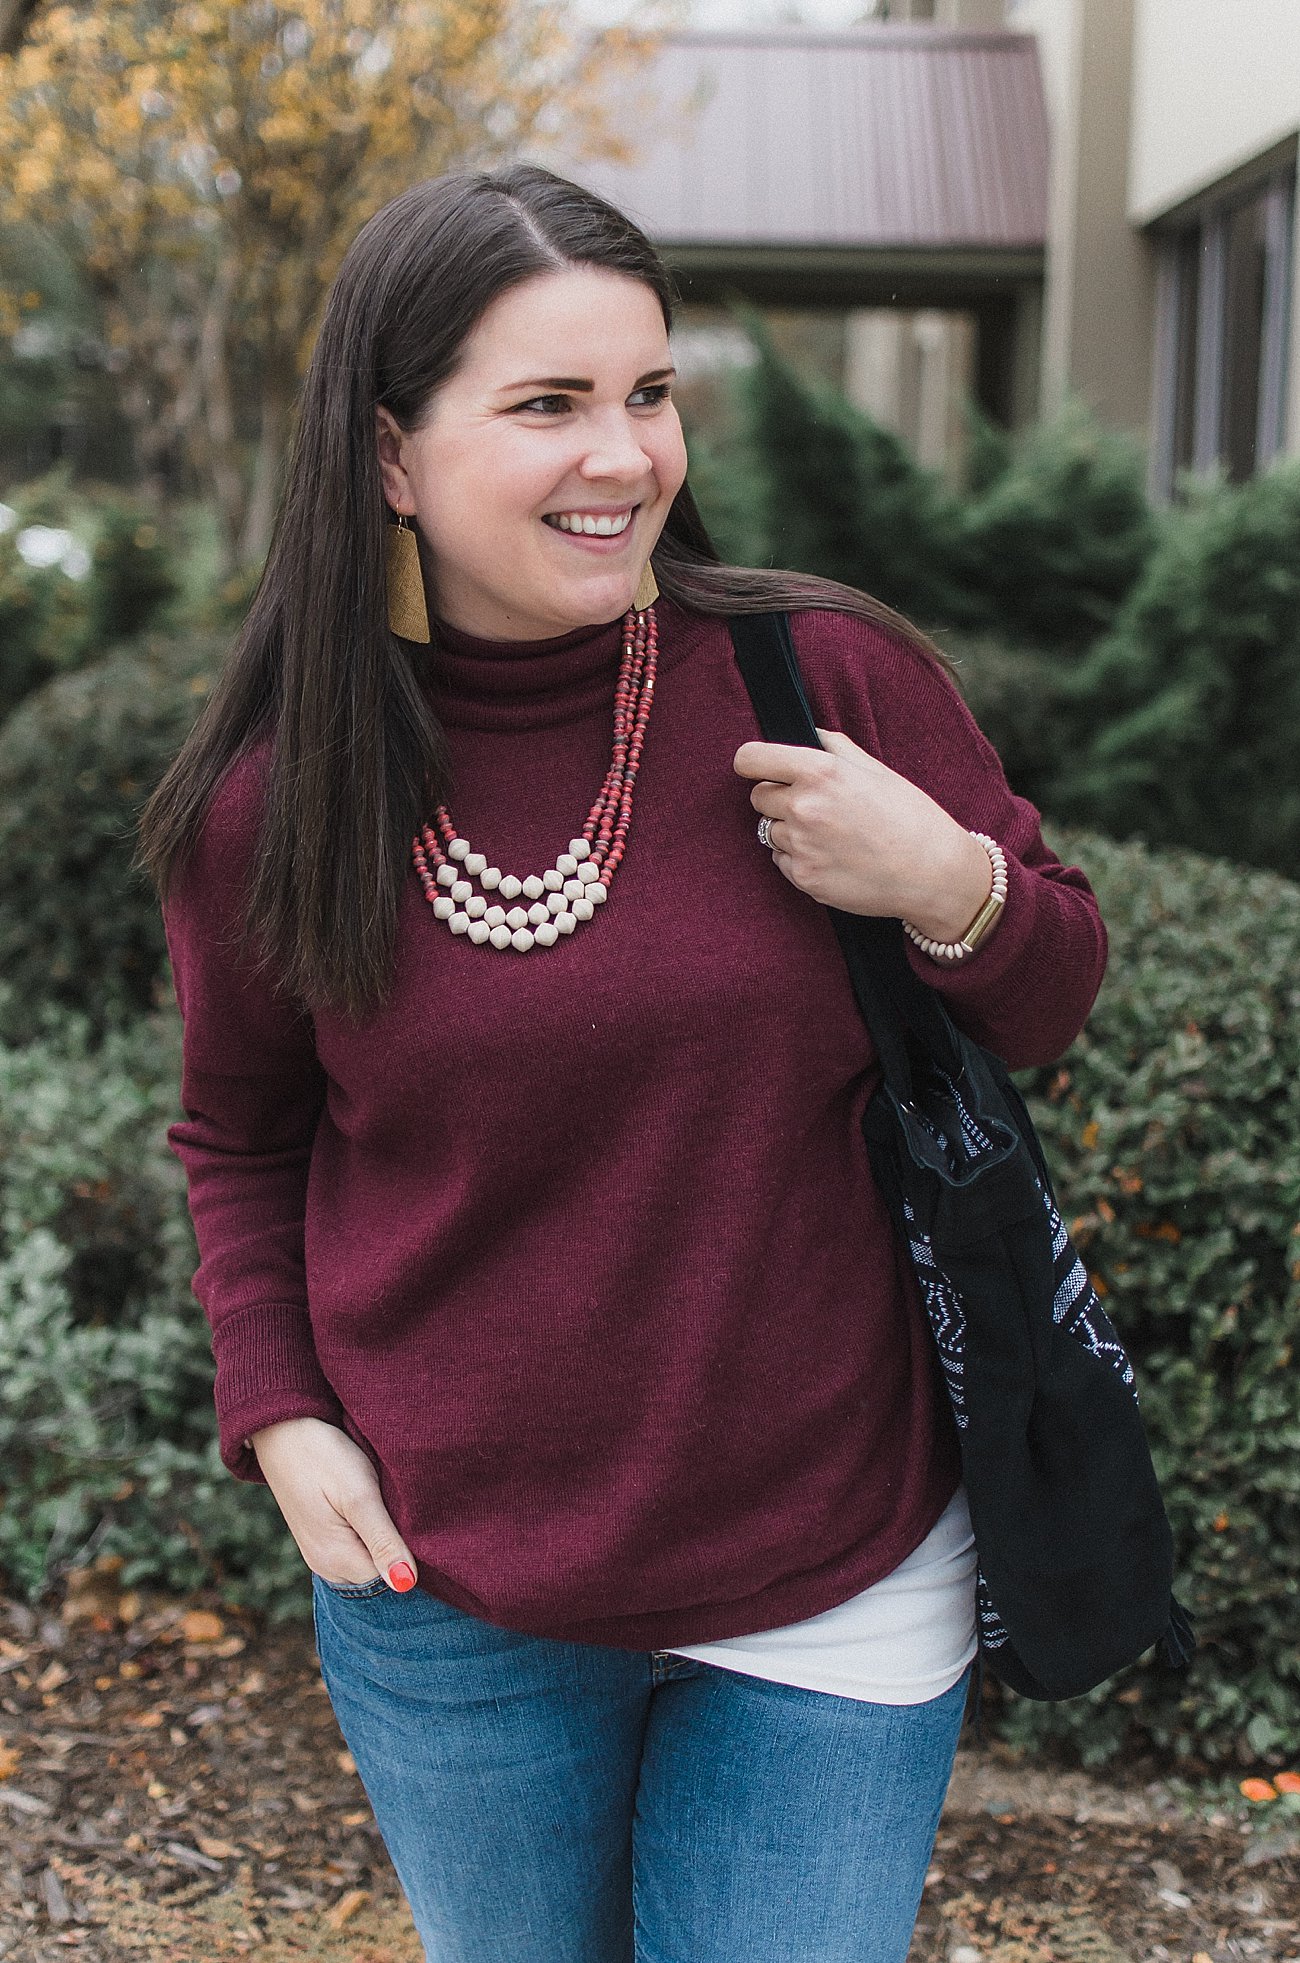 Ethical and Fair Trade Fashion - Hope Made in the World Alpaca Sweater, Dojo flare jeans, Rapha House bag, Milk and Honey market jewelry - fall fashion (3) - The Classic Fall Sweater Made to Last by North Carolina ethical style blogger Still Being Molly